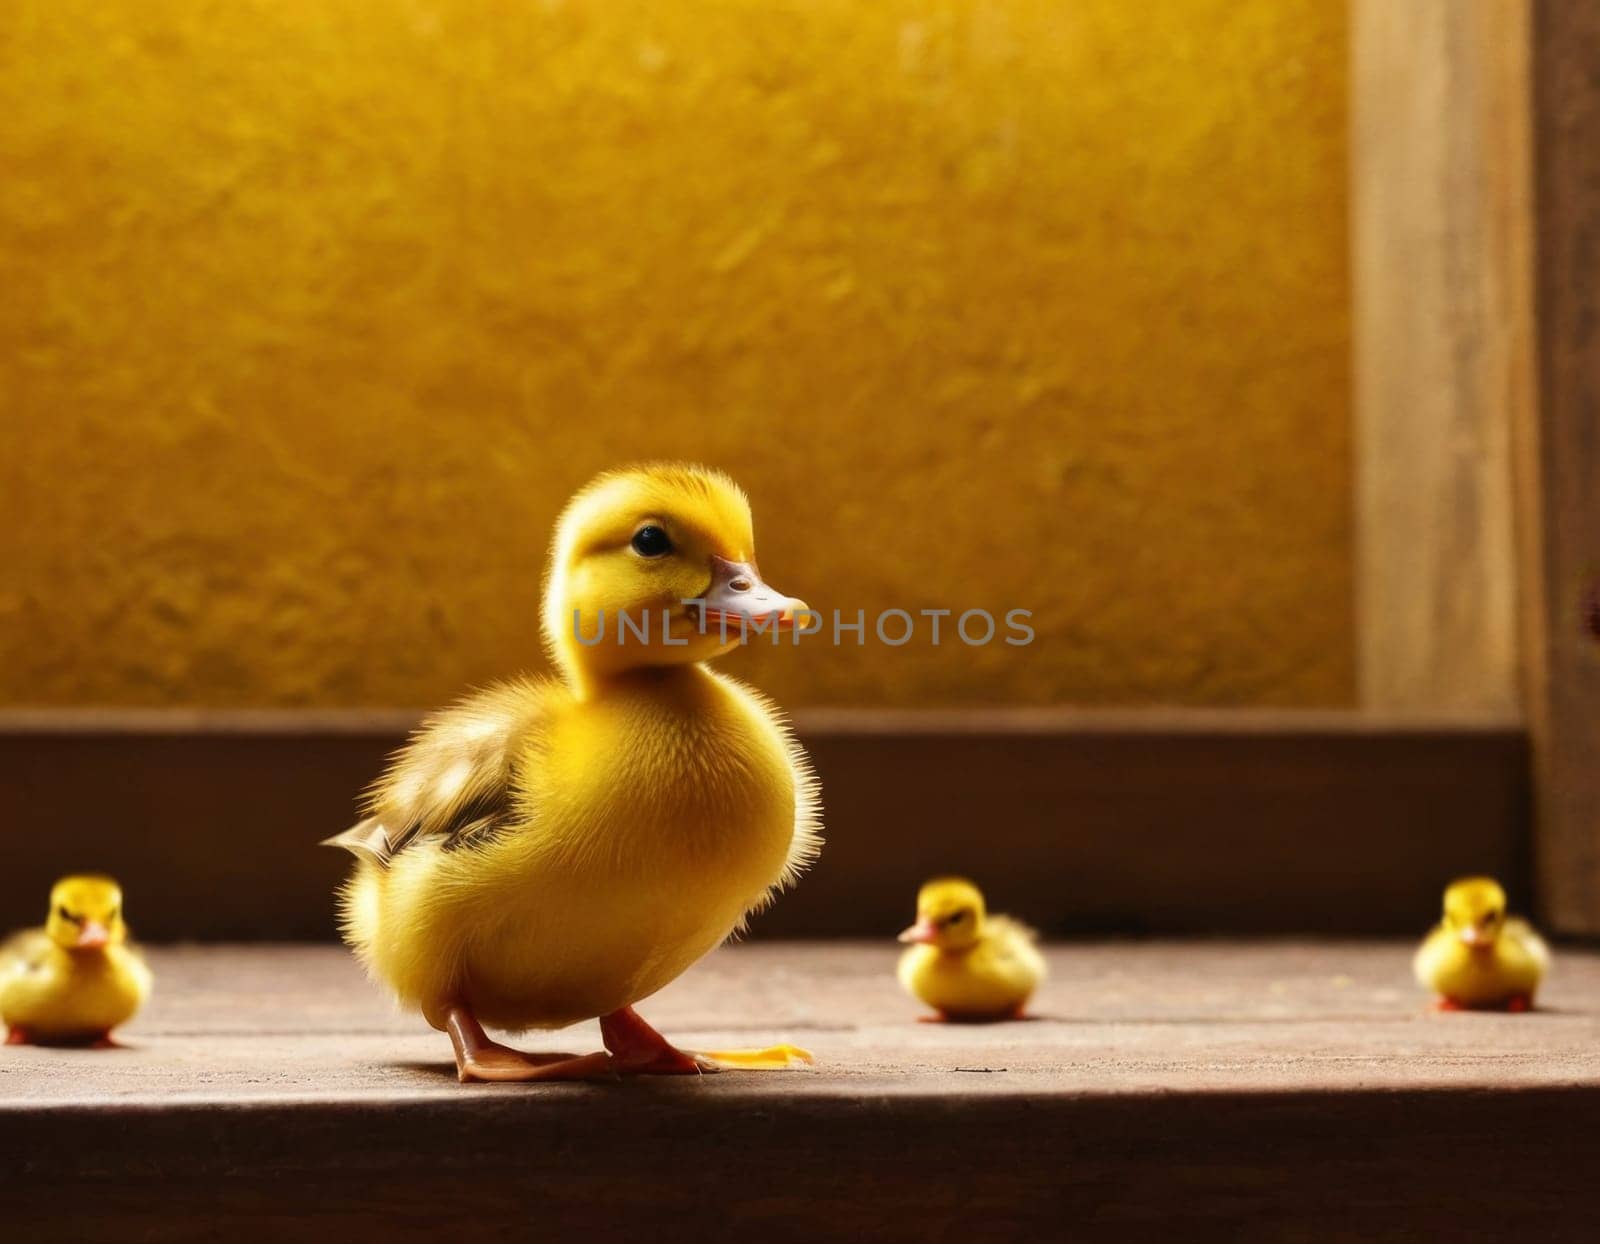 A group of baby ducks are standing in a row. They are all yellow and seem to be looking at the camera.AI generation